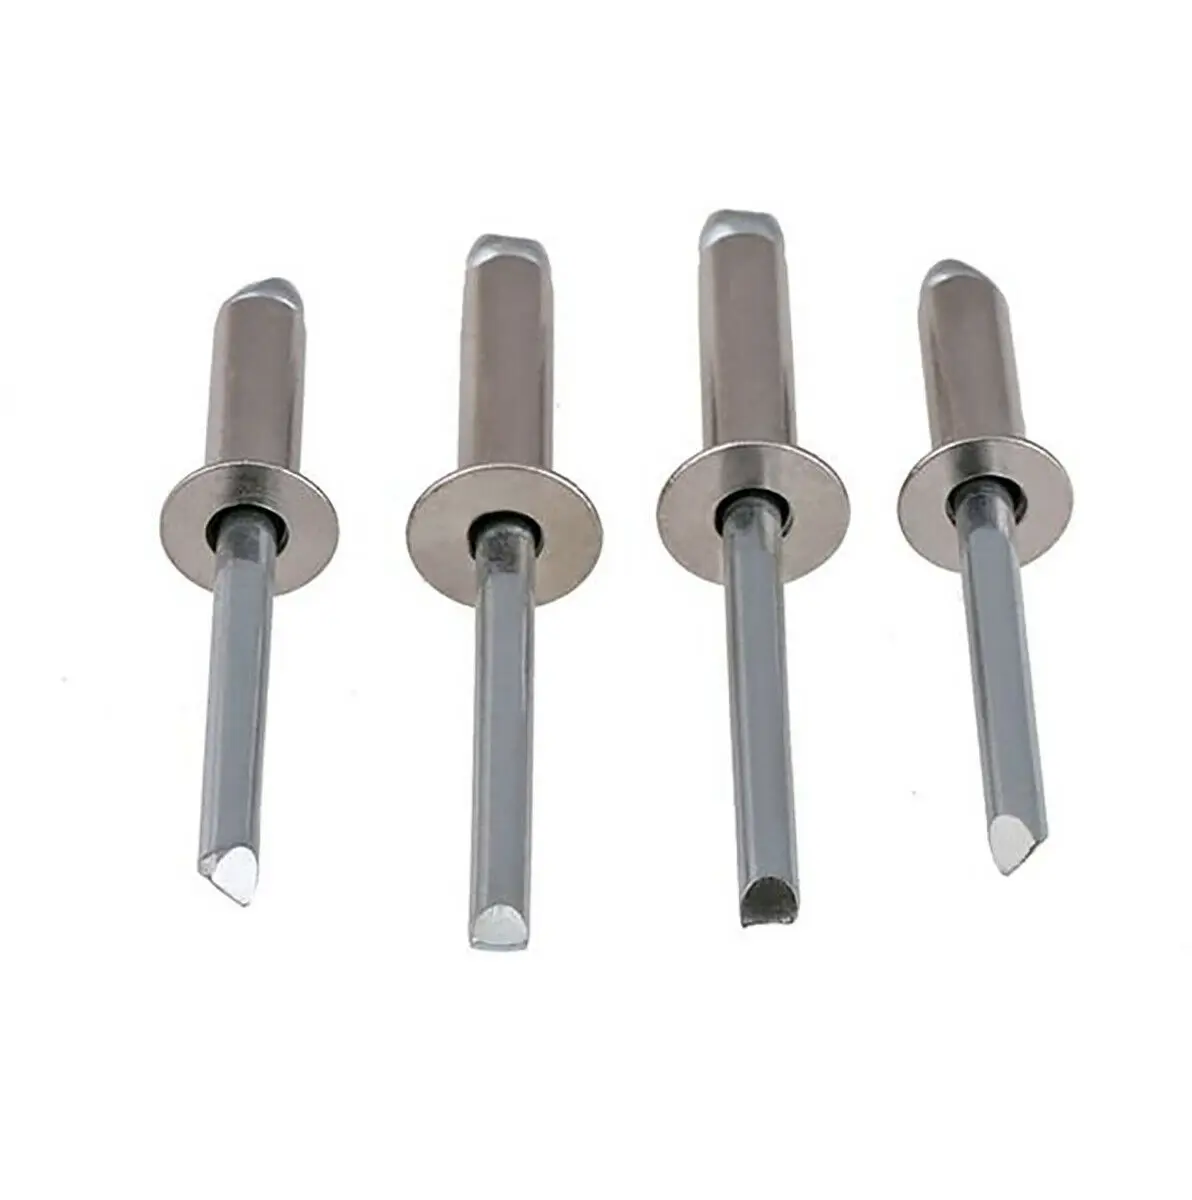 M3 M3.2 M4 M5 Blind Rivets Countersunk Head Pop Rivets A2 304 Stainless Steel 